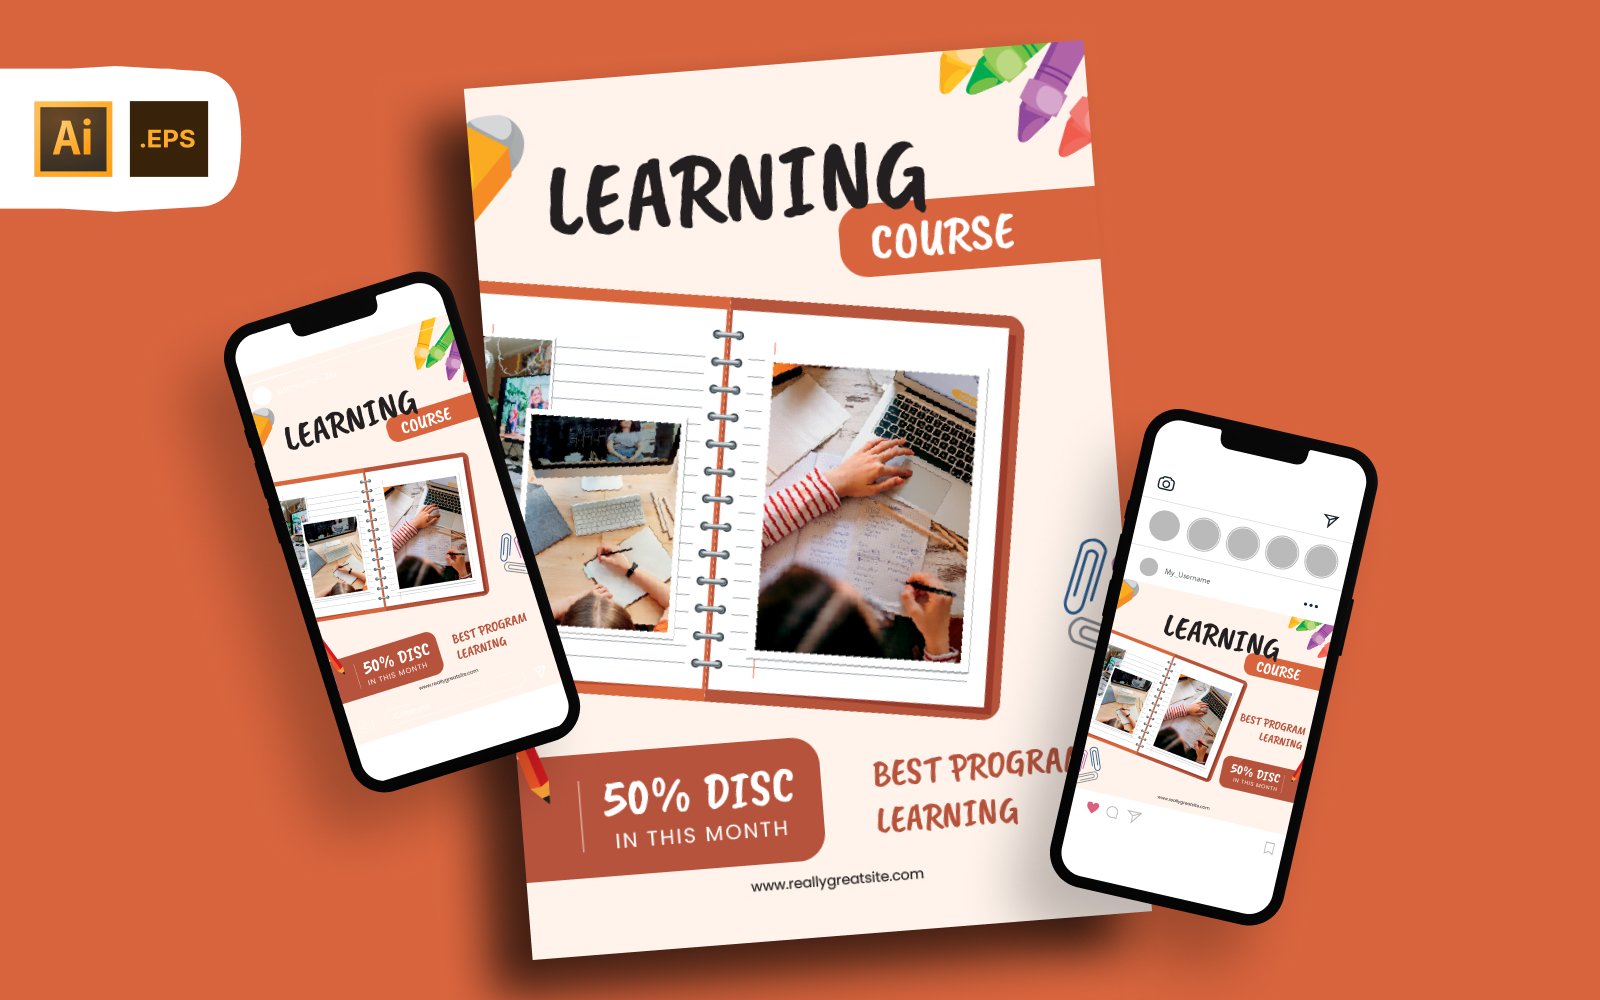 Template #369448 Learning Course Webdesign Template - Logo template Preview